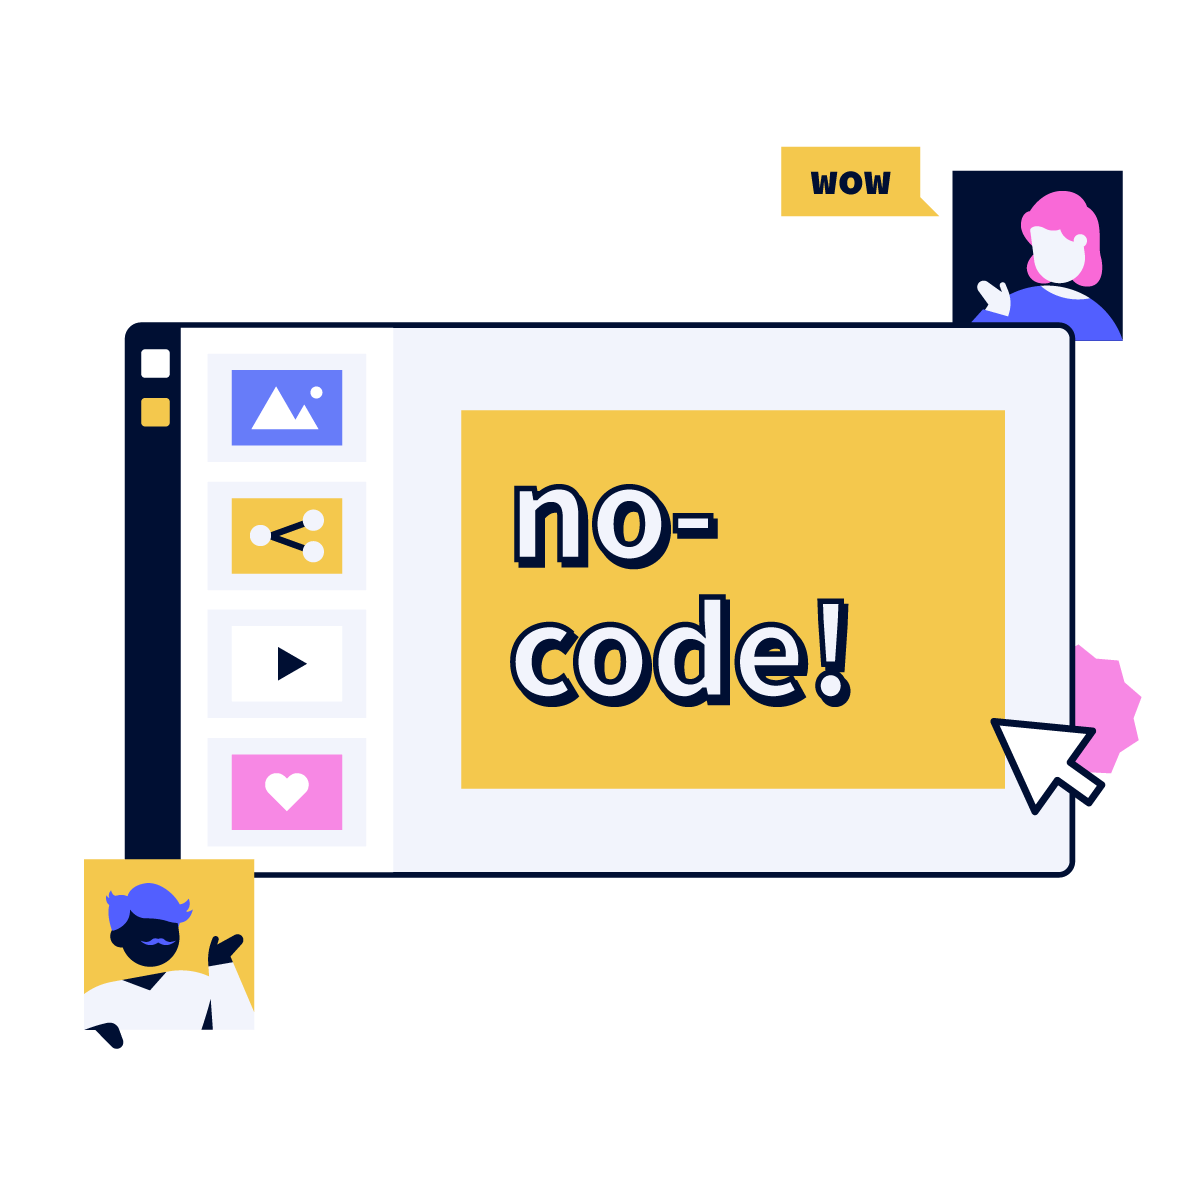 Illustration of the no-code tool Genially